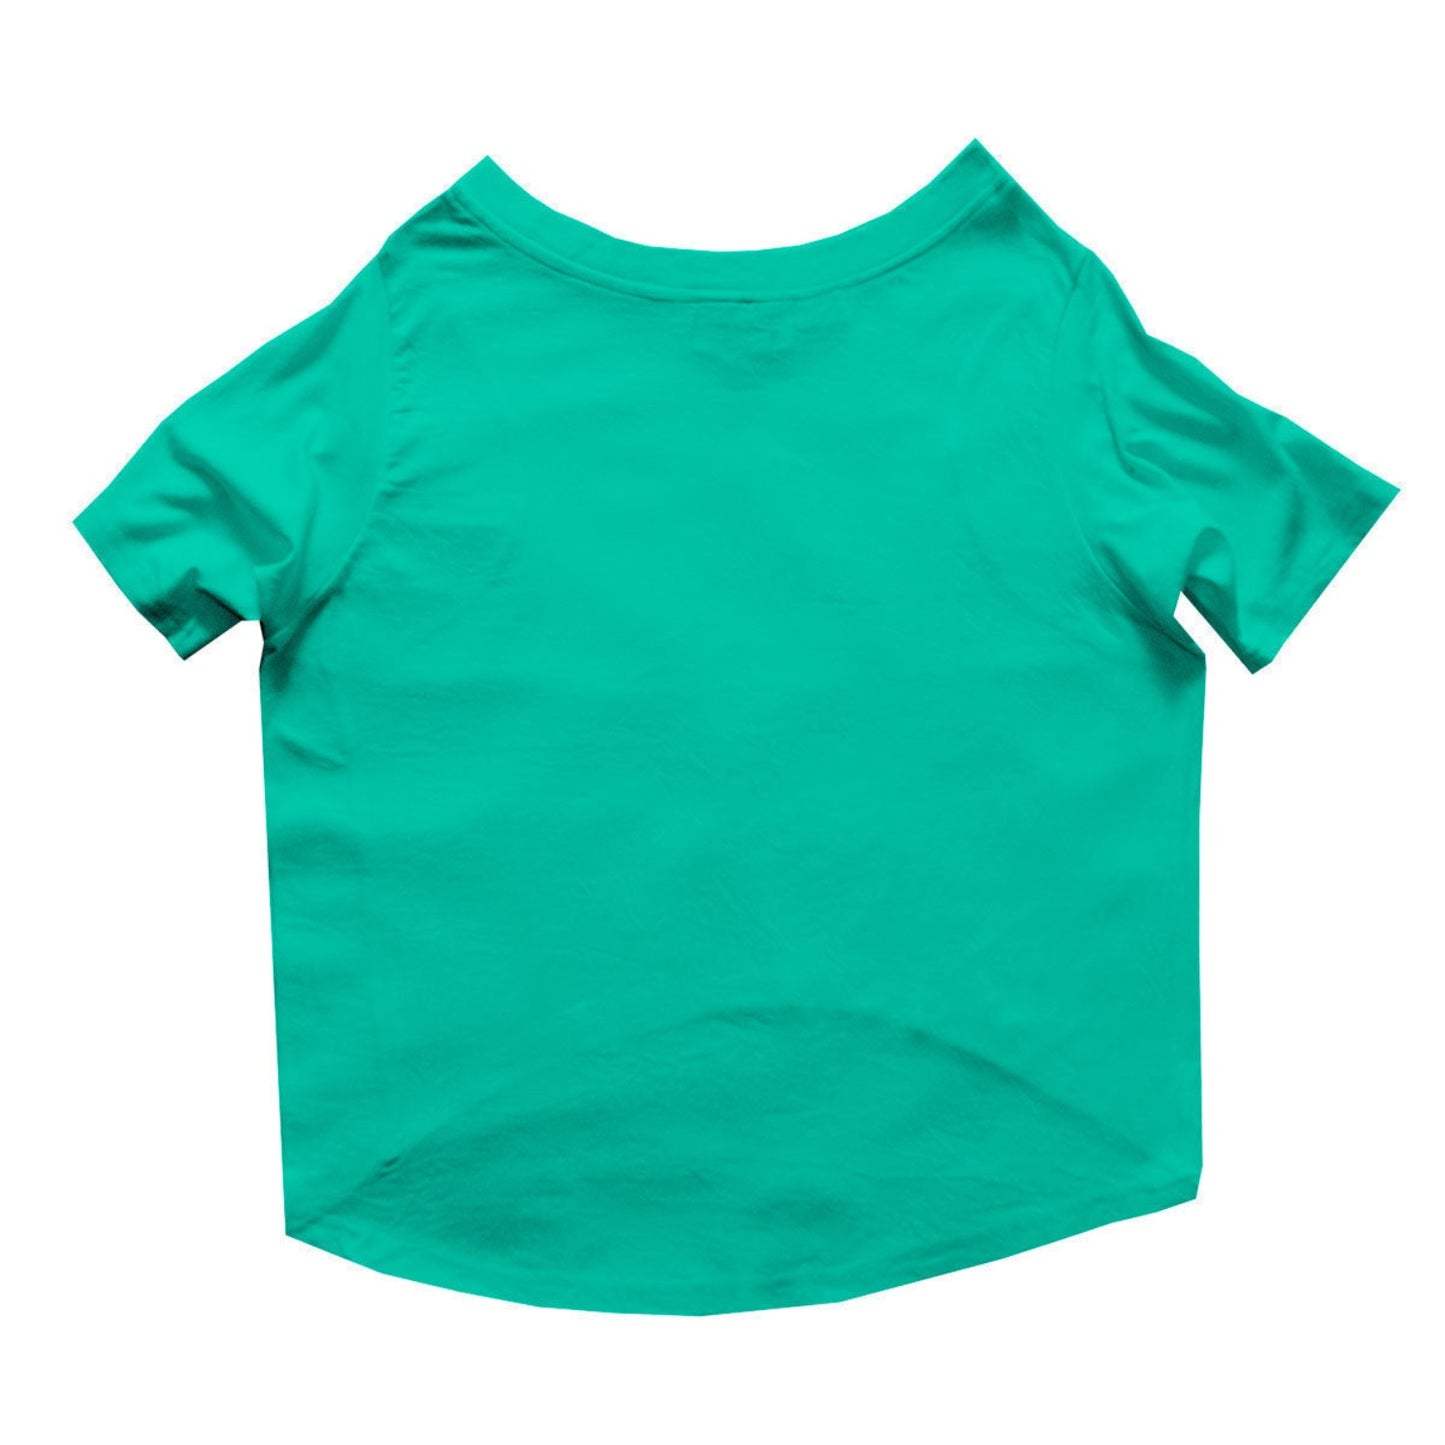 Ruse  / Aqua Green Ruse Basic Crew Neck "I'm Too Old for this Sh*t" Printed Half Sleeves Dog Tee19